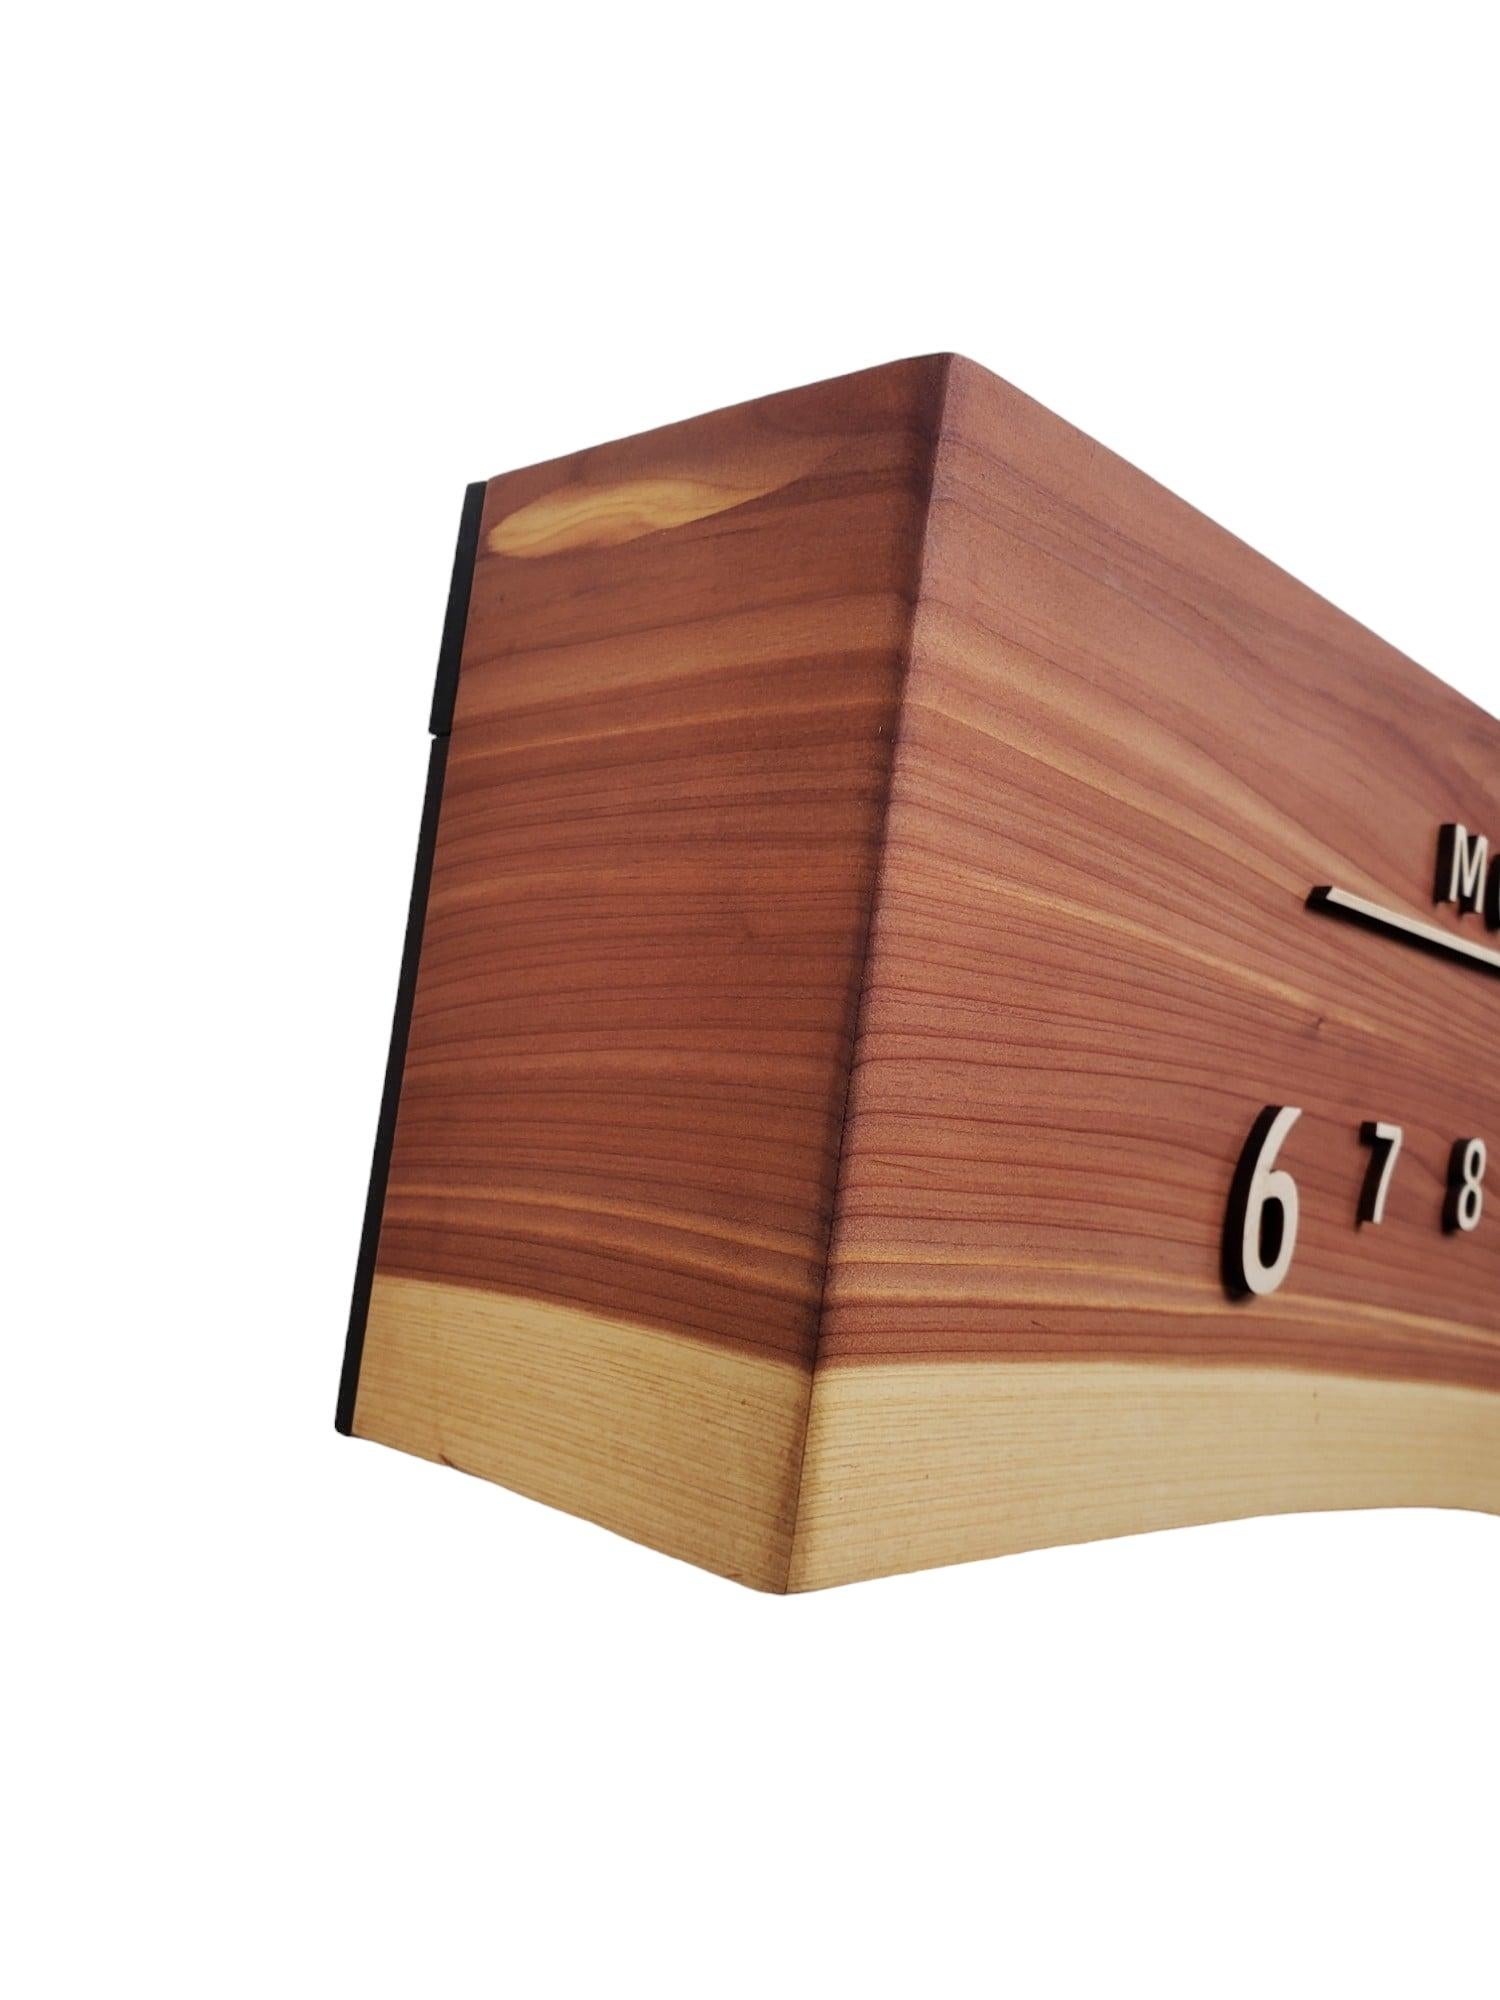 Hand-Crafted Treasure: 3-Foot Cedar and Maple Linear Clock